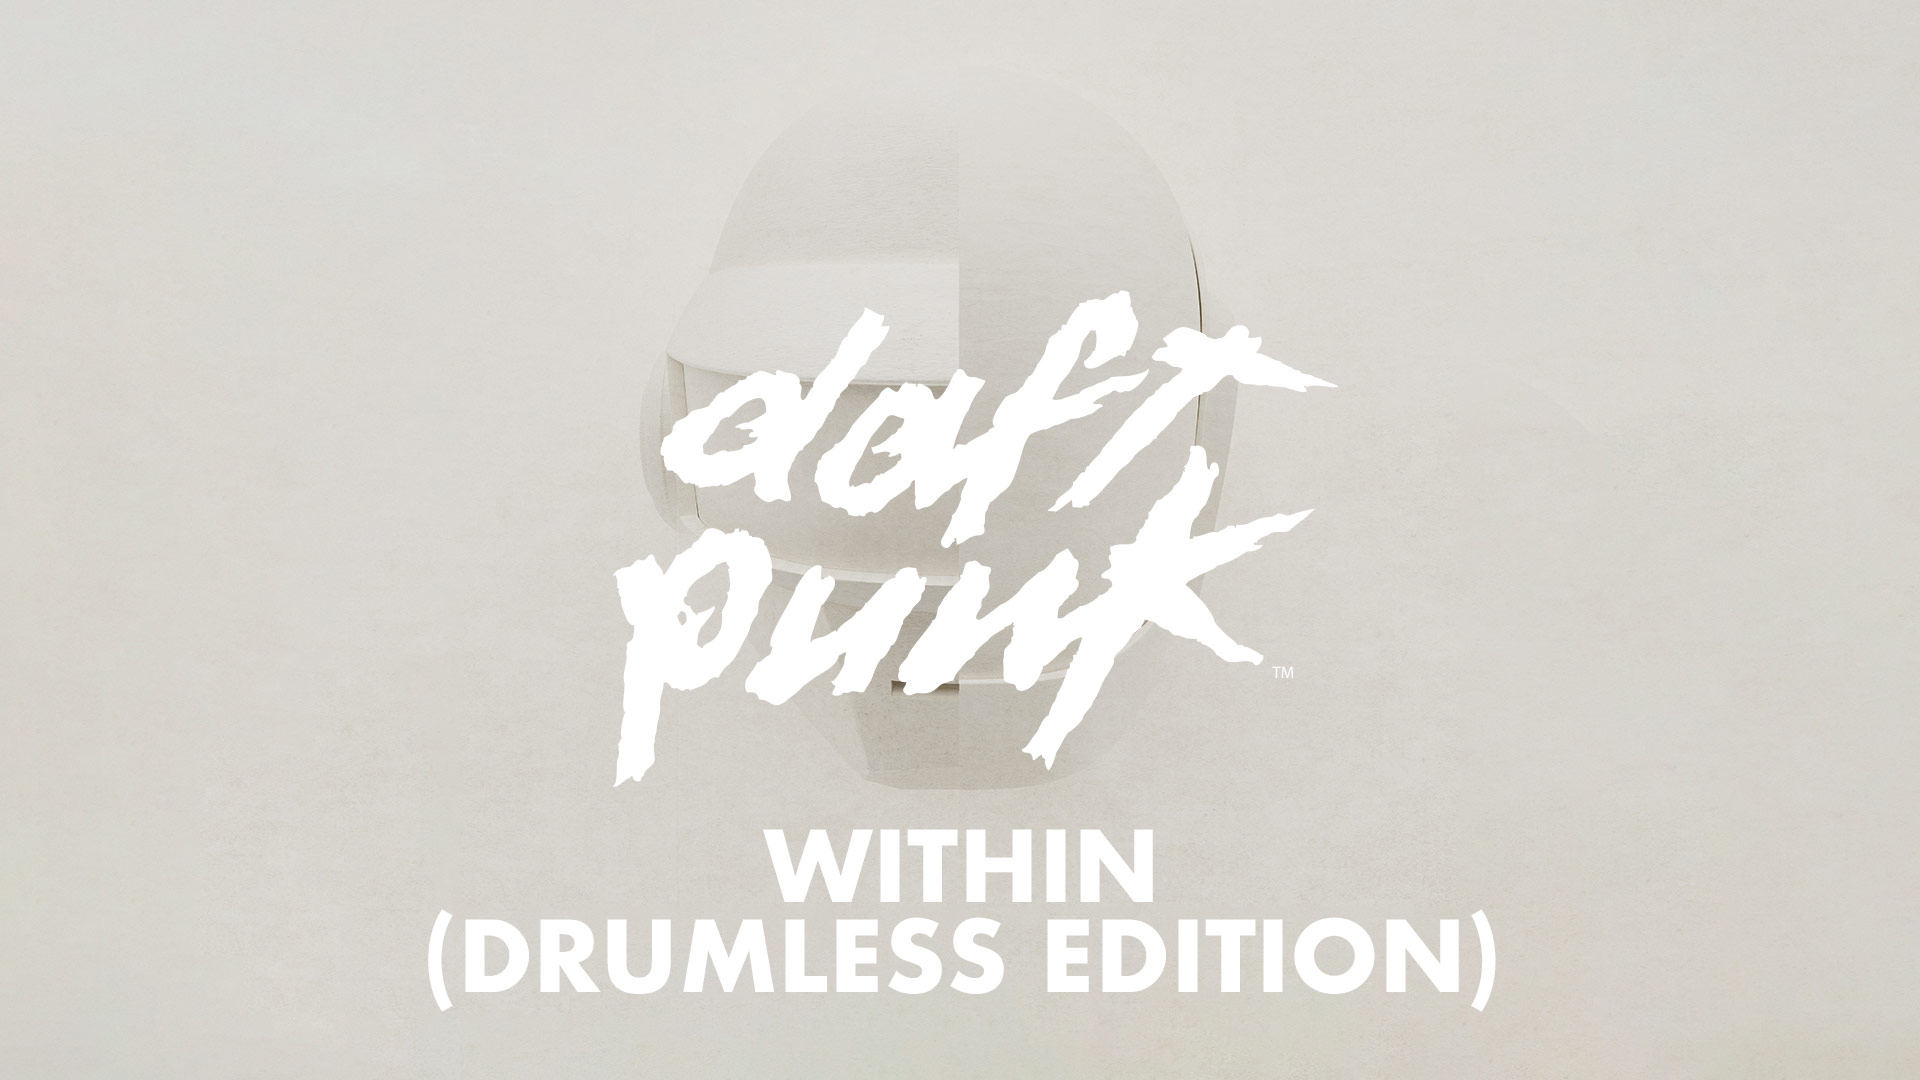 Daft Punk Looking for a special gift? Our Daft Punk featured LP is perfect  for you! Carved with love this decorative Vinyl will stand out in your room  with its unique design